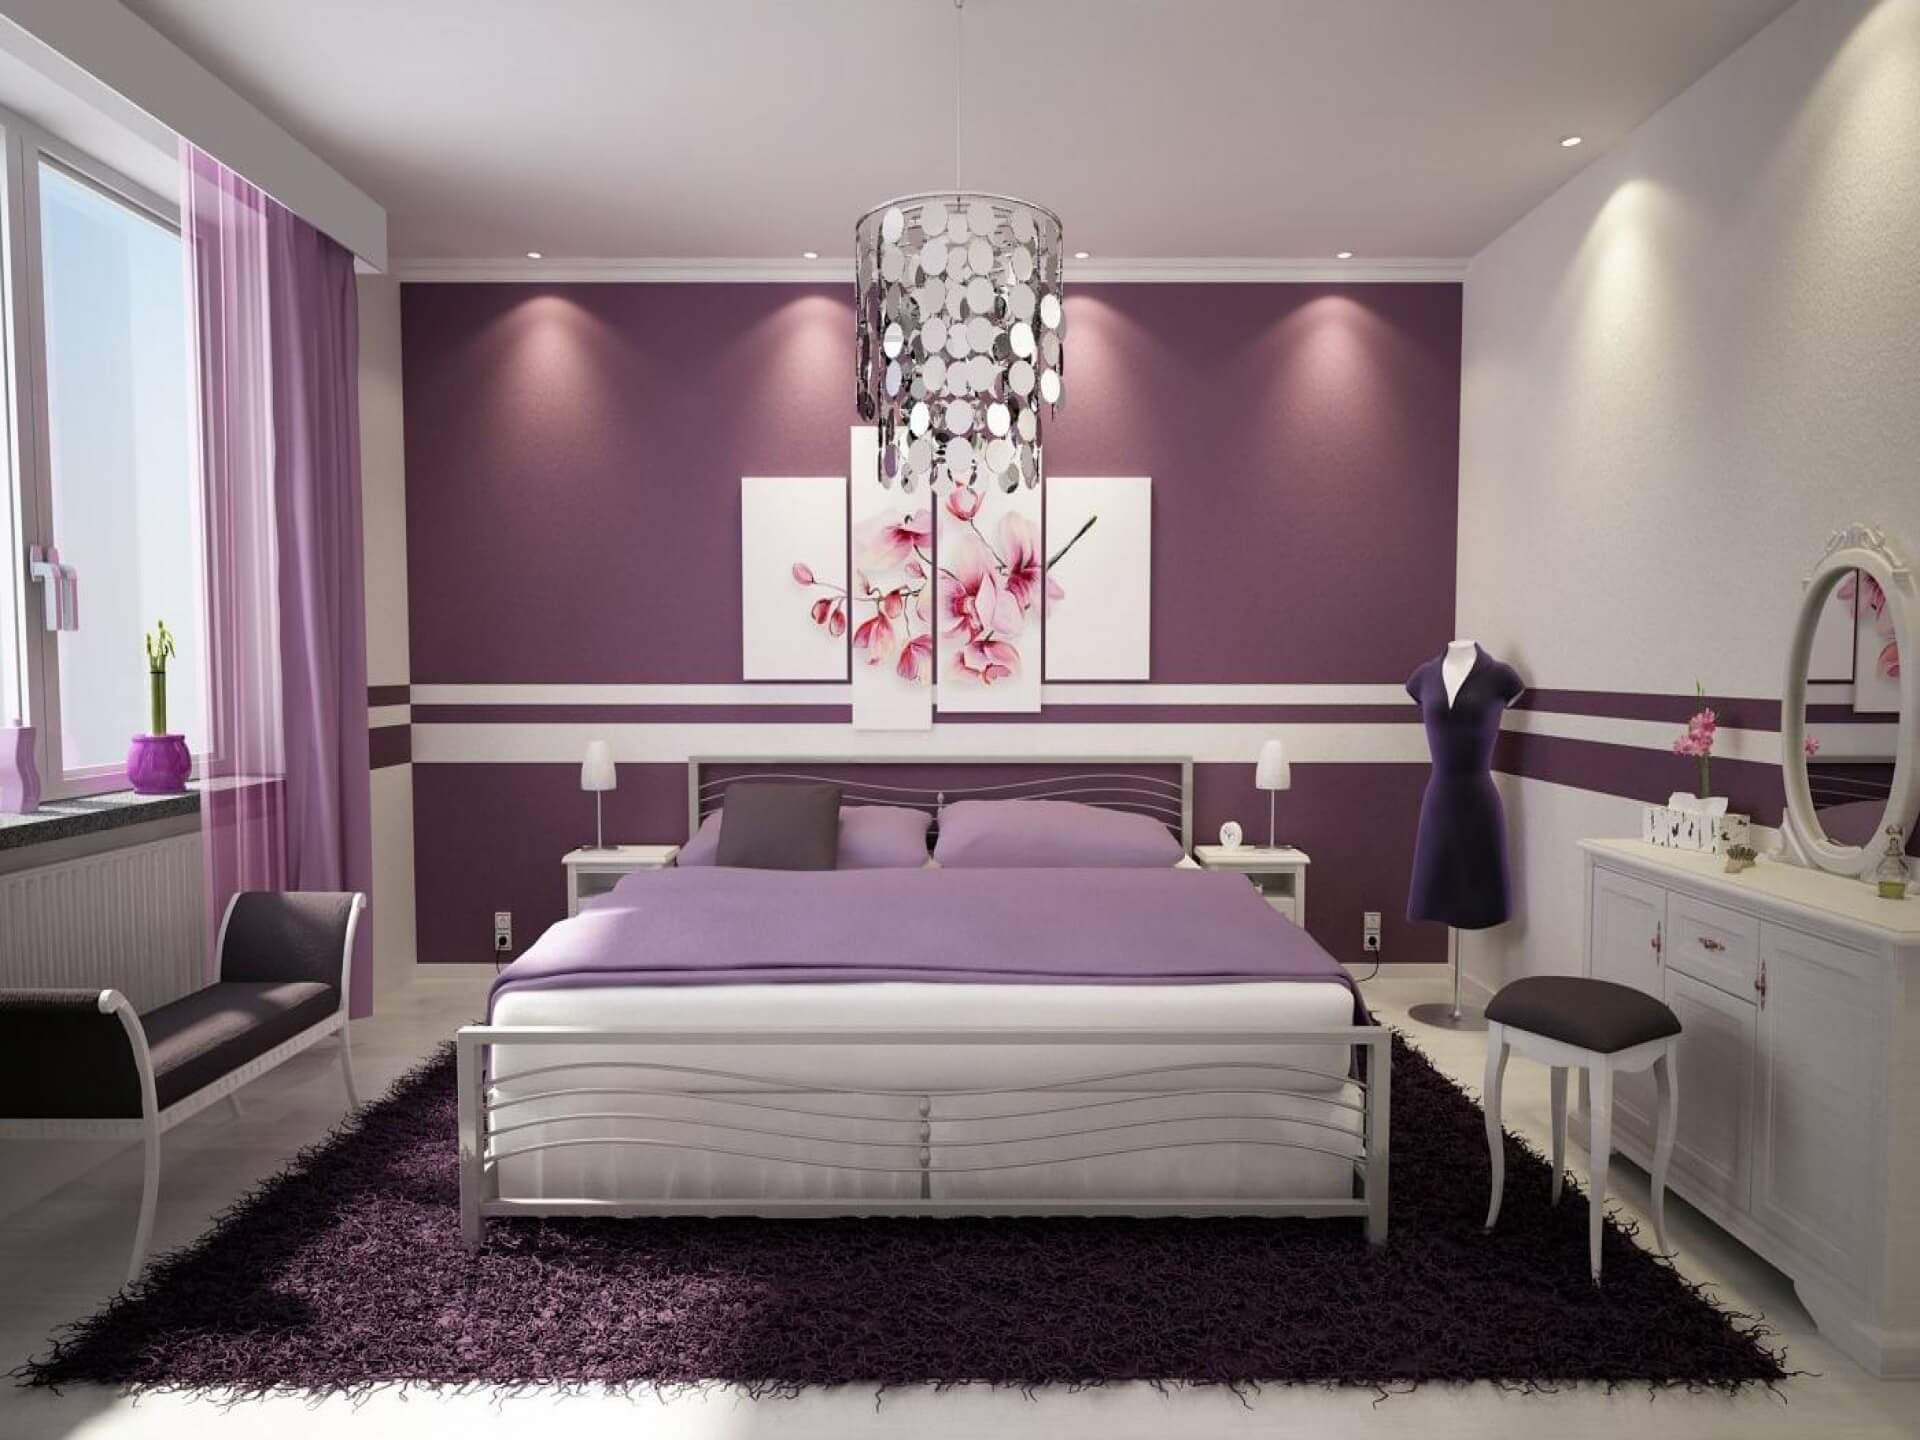 Paint Ideas For Girl Bedroom
 Top 10 Girls Bedroom Paint Ideas 2017 TheyDesign